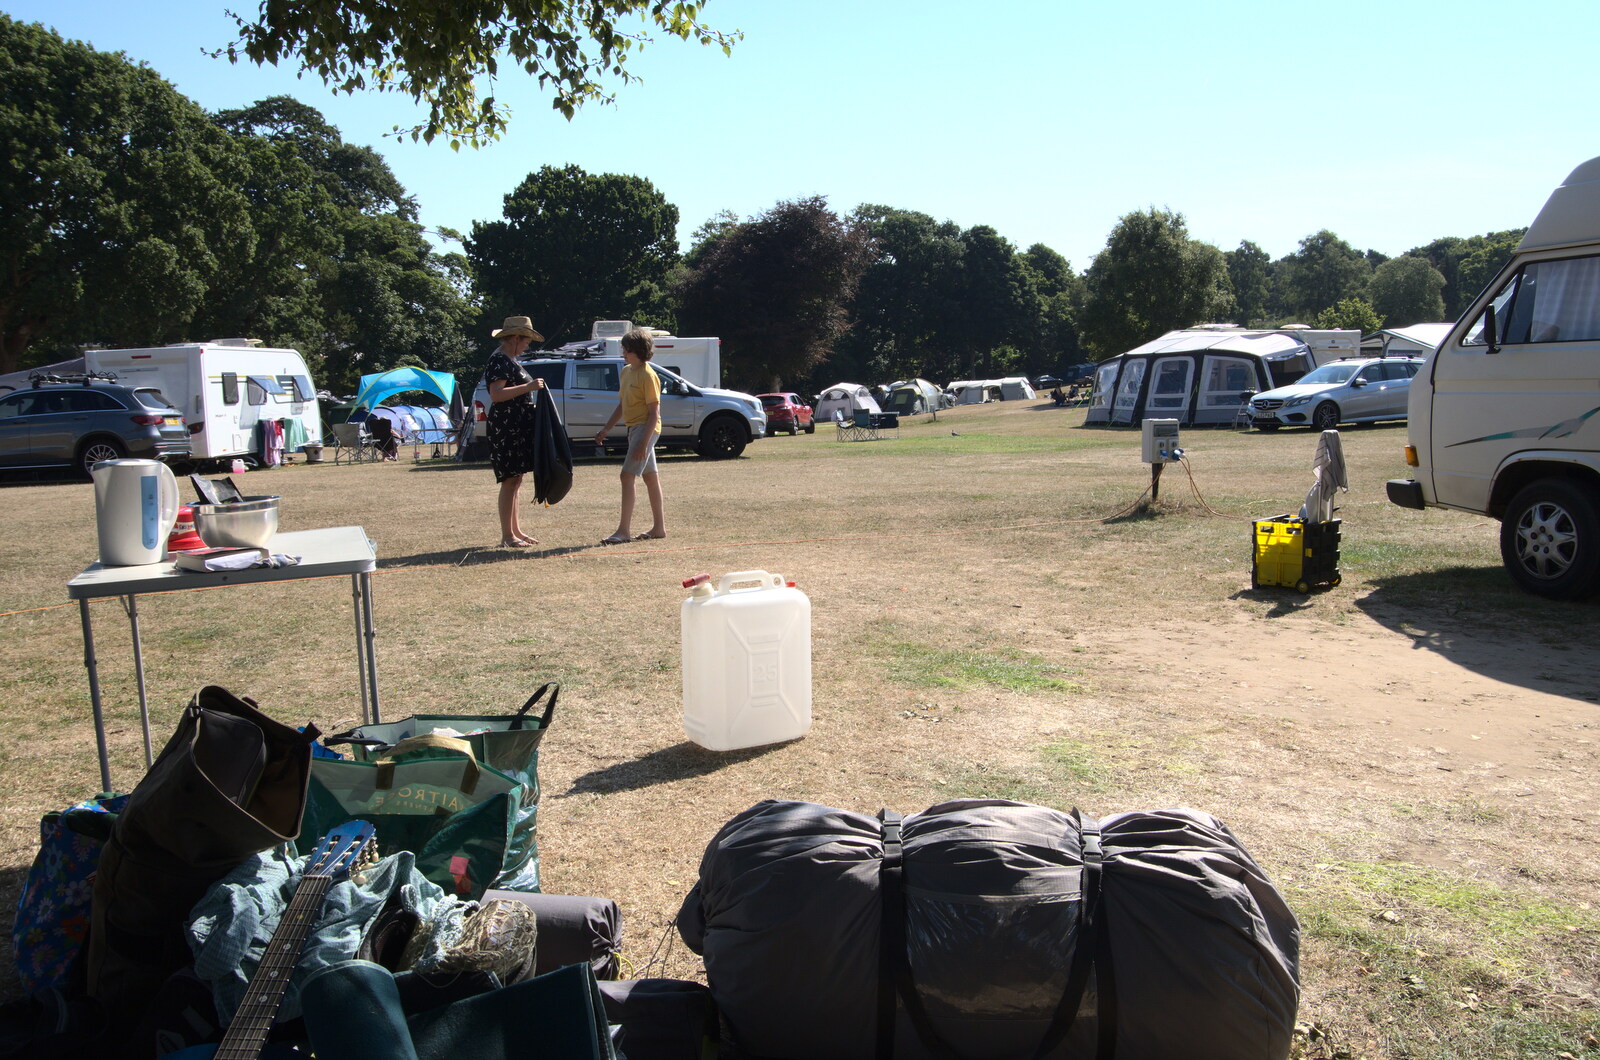 We pack up the awning from Camping at Forest Park, Cromer, Norfolk - 12th August 2022